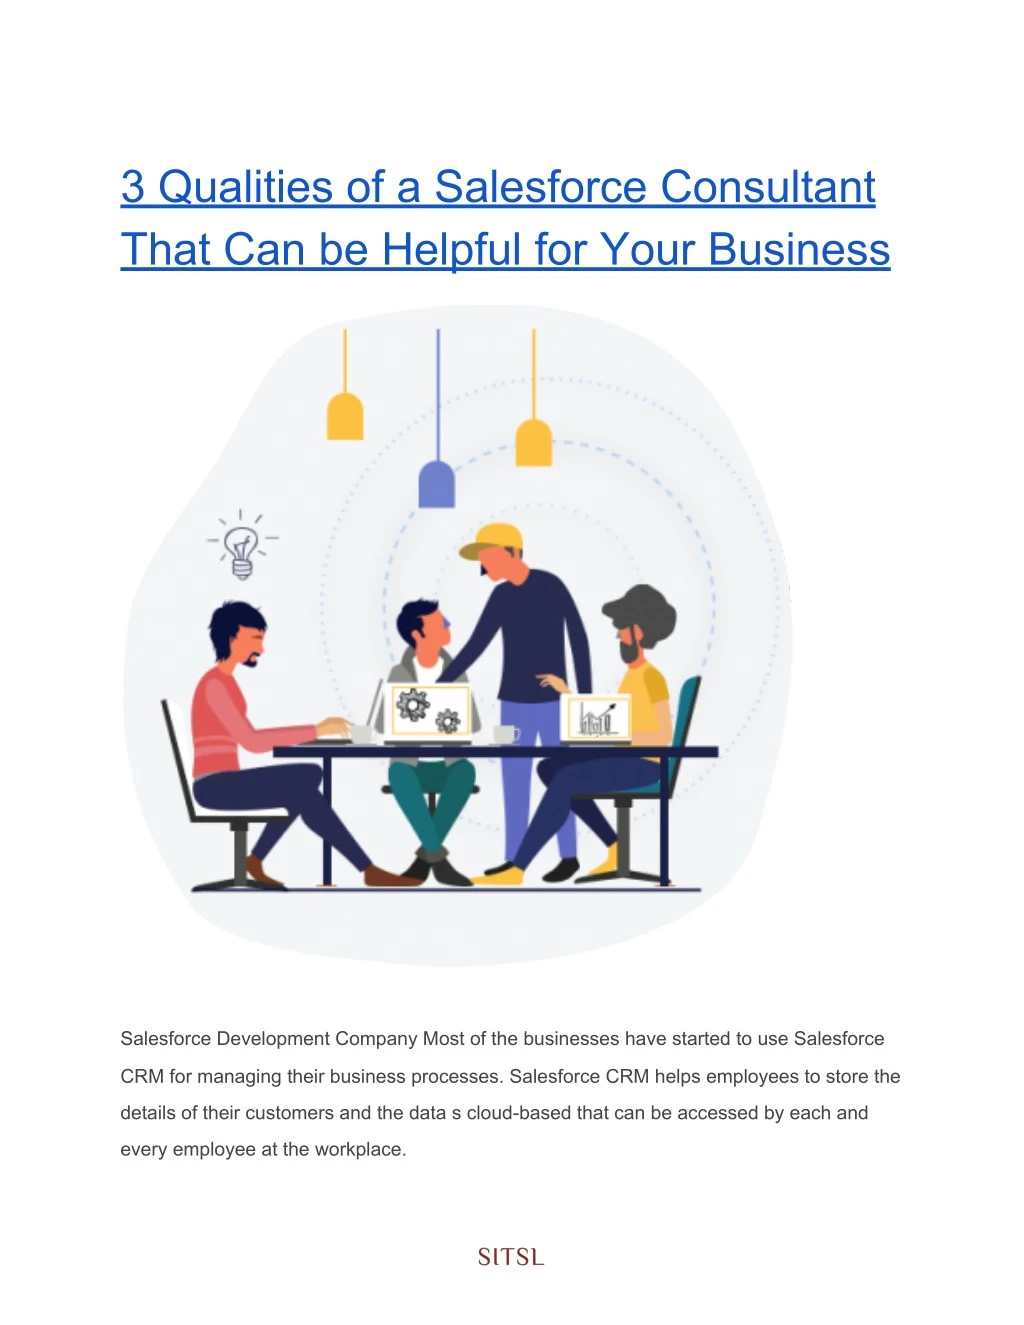 3 qualities of a salesforce consultant that